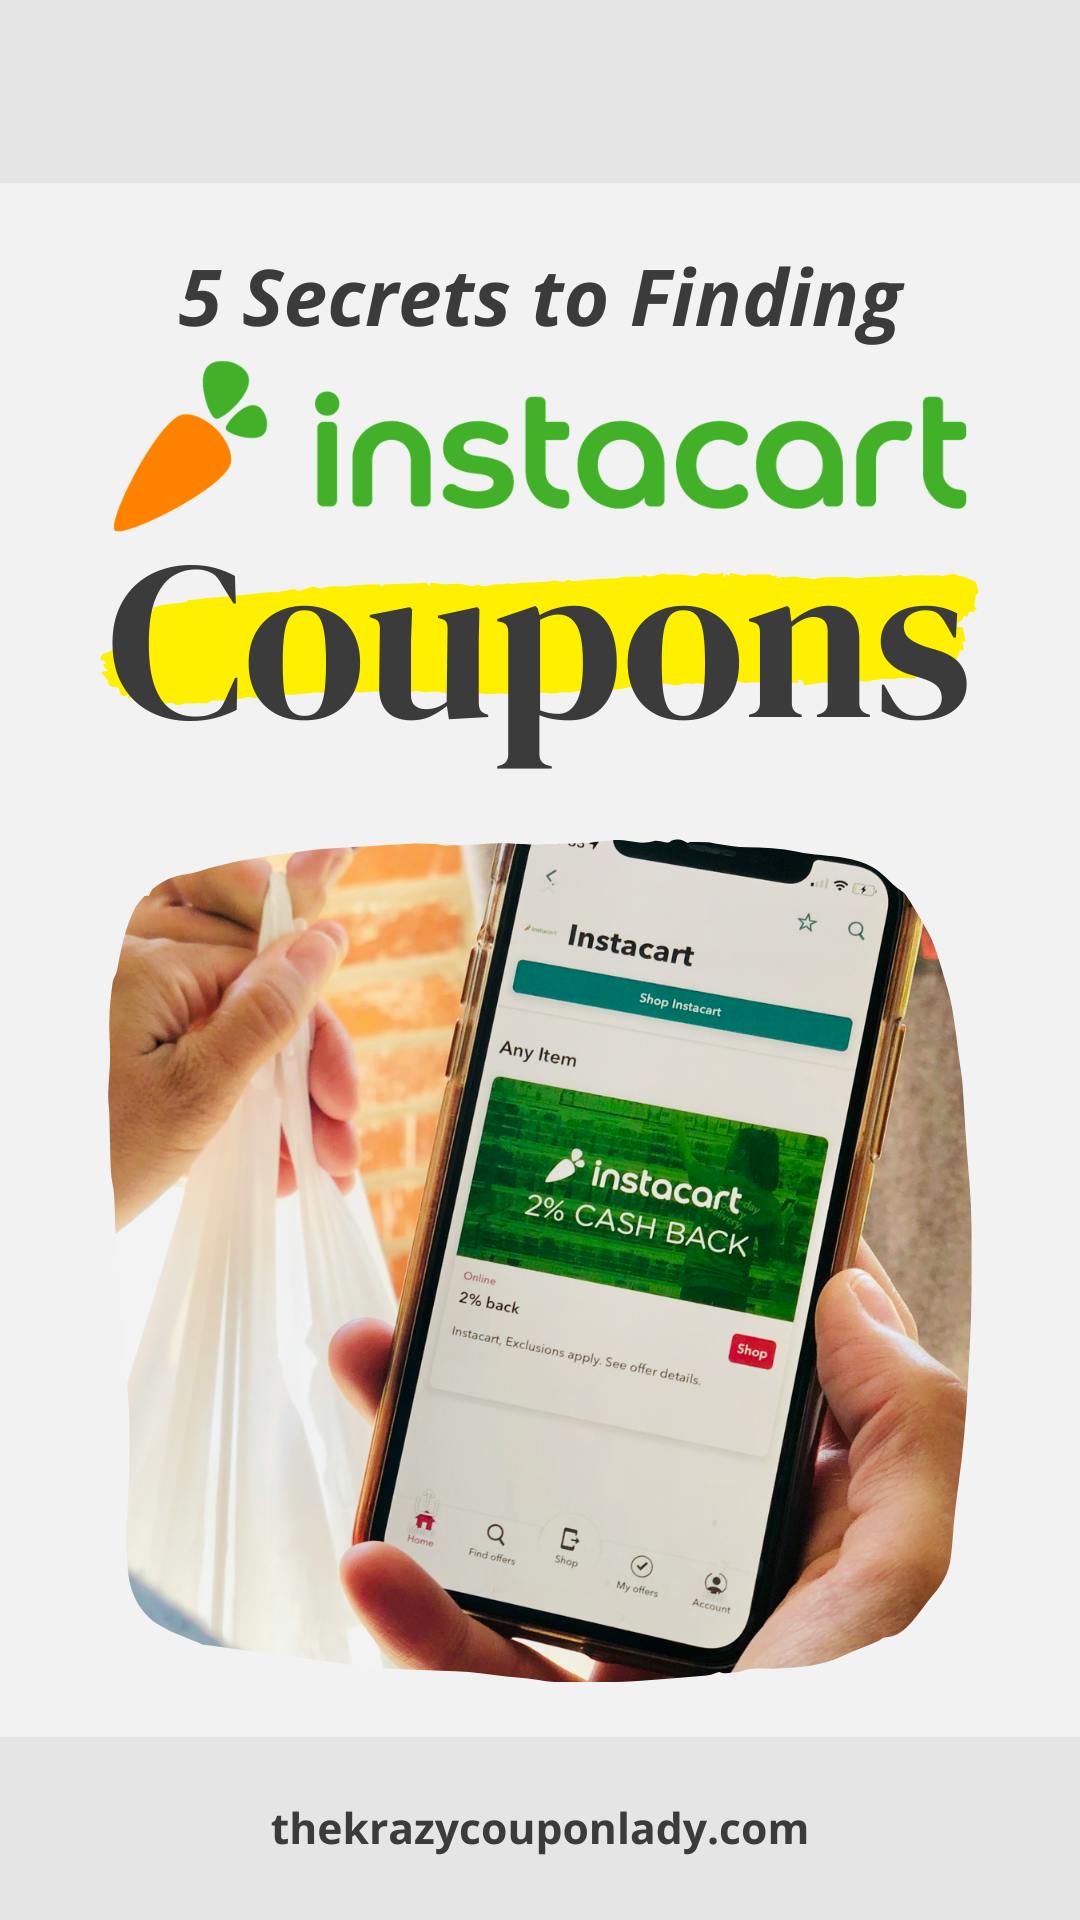 5 Secrets to Finding an Instacart Coupon for $10 - $20 Off